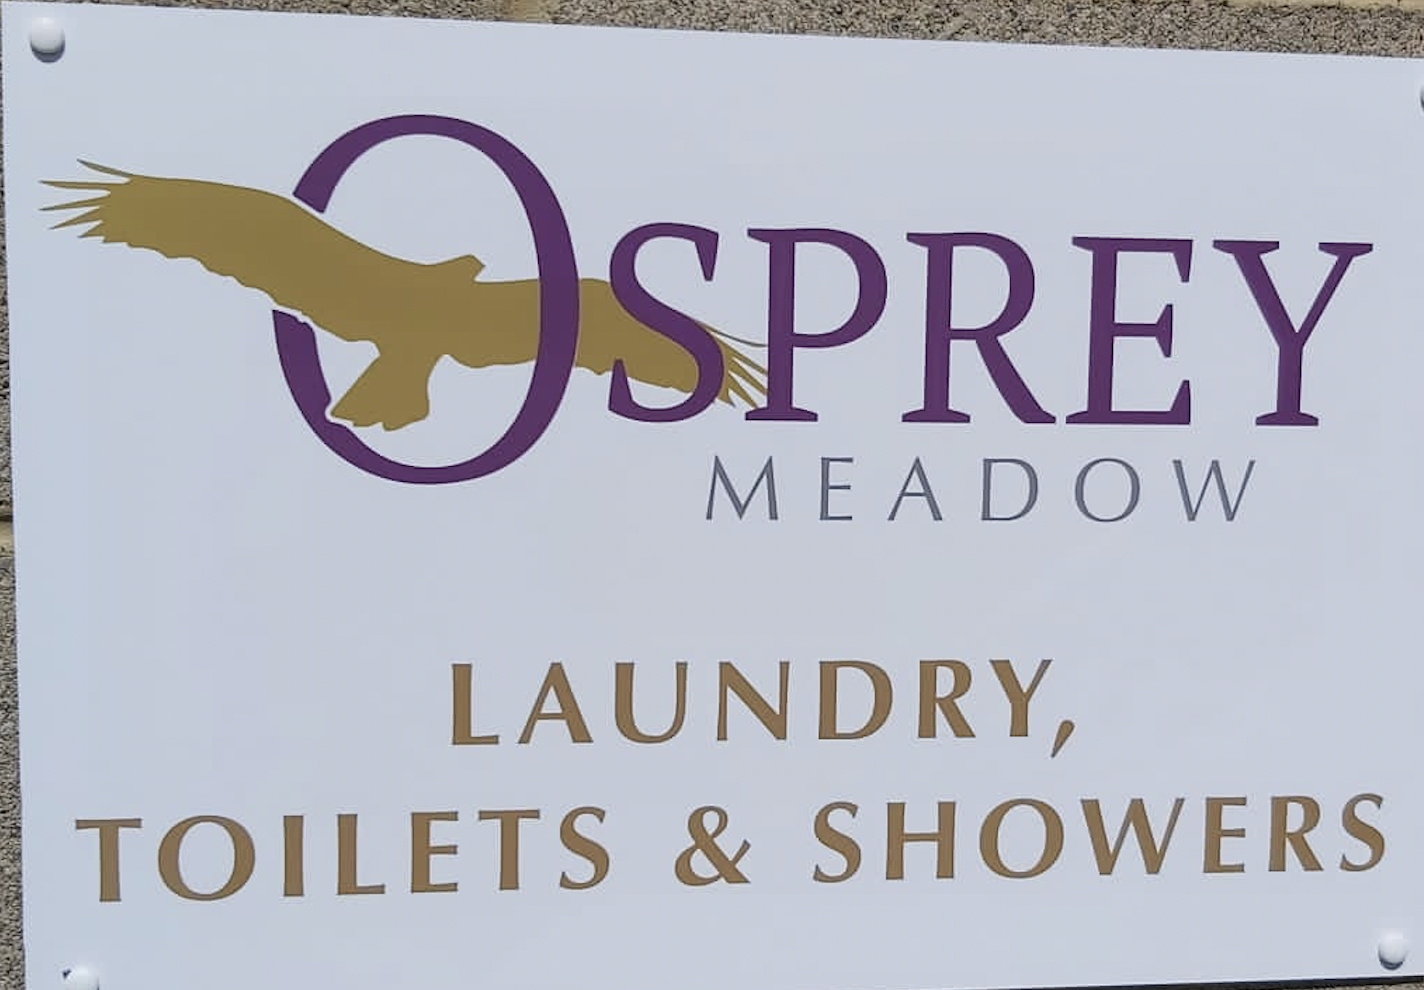 Osprey Meadow sign showing the laundry, toilets, and showers